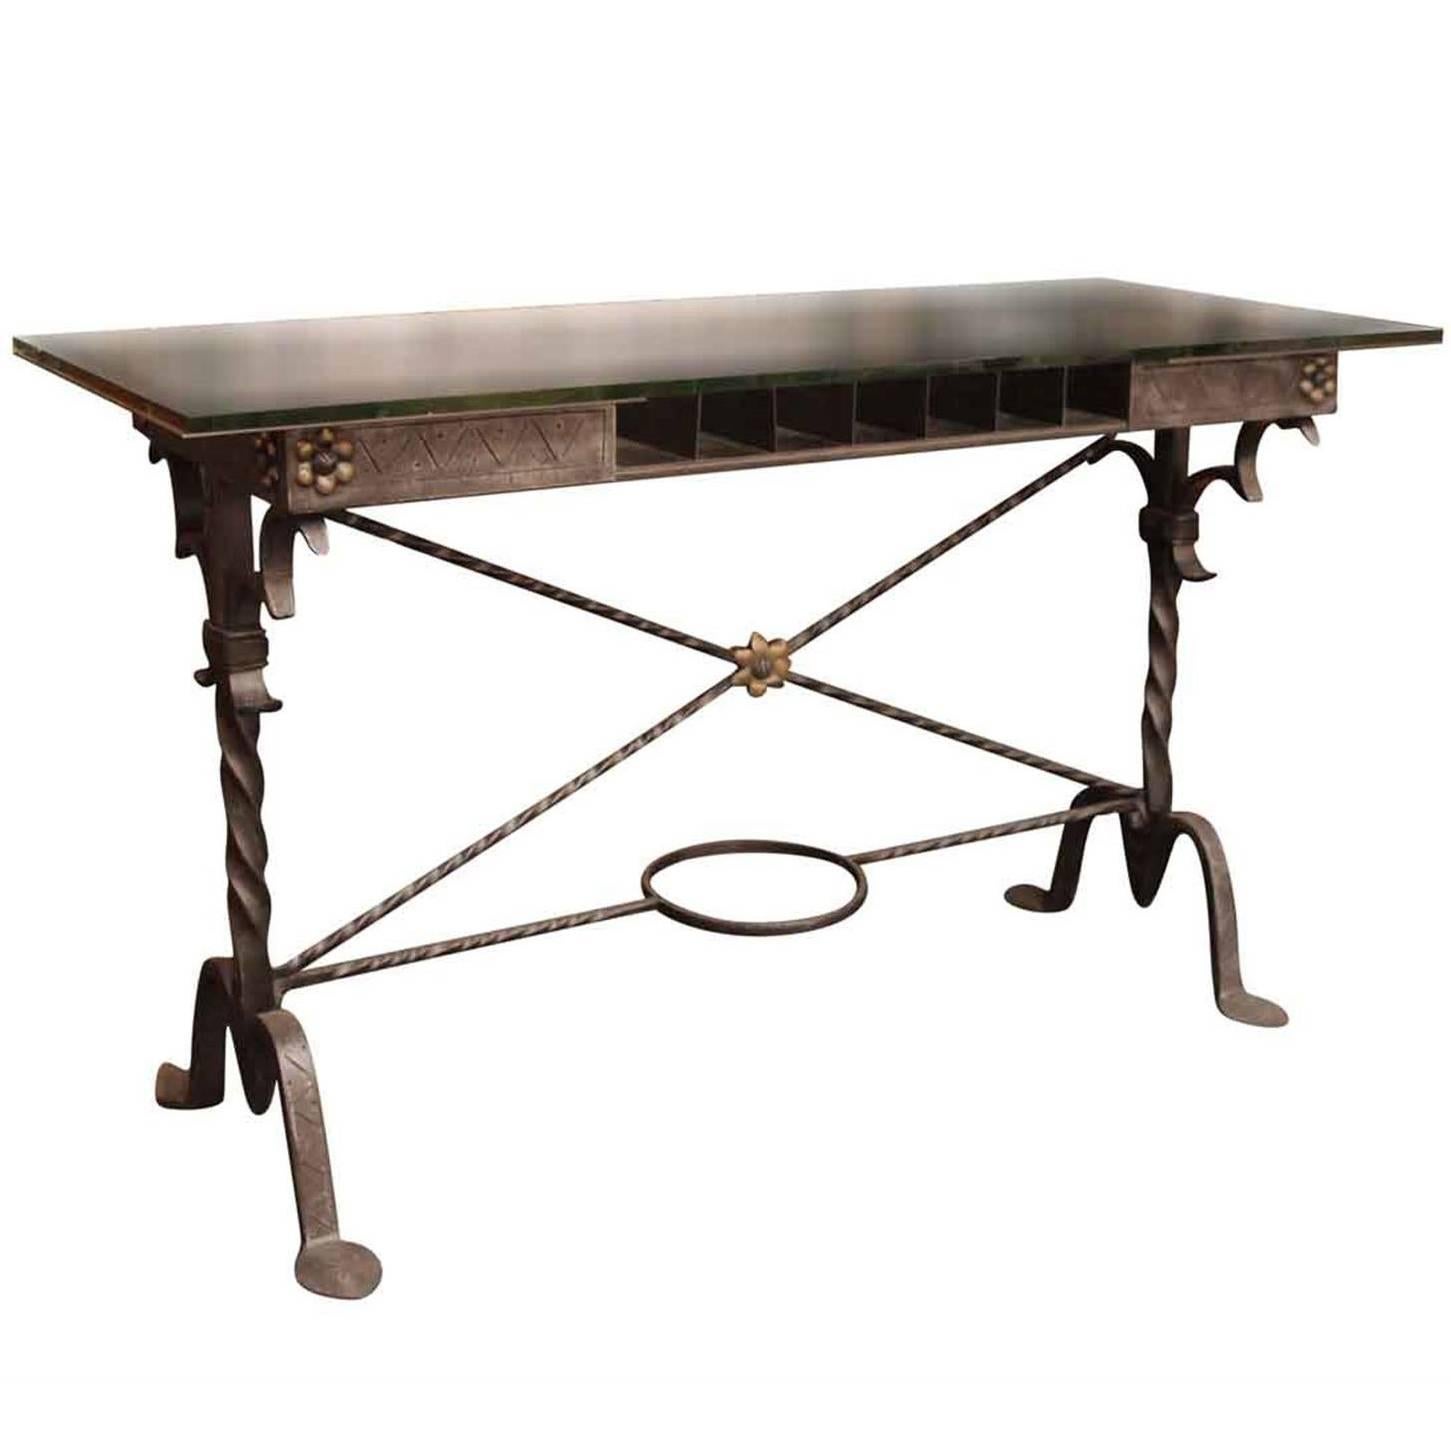 1920s Hand Wrought Iron Bank Table by Samuel Yellin